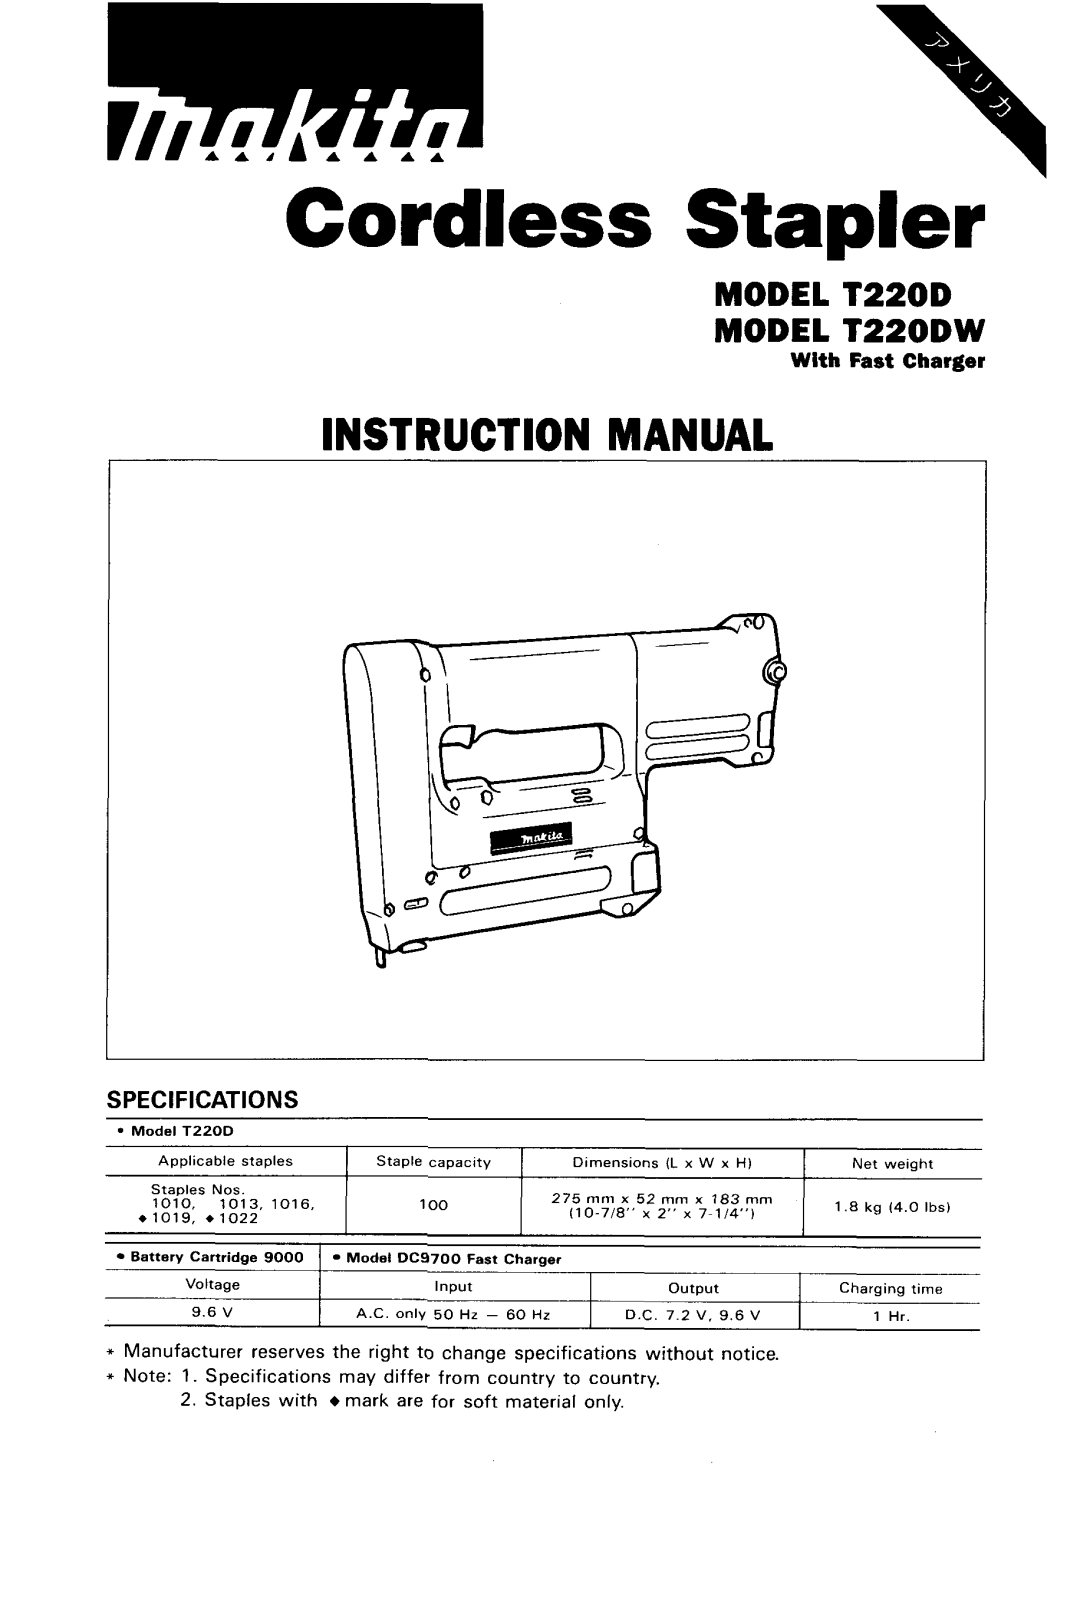 Makita Model T220DW instruction manual Specifications, Instruction Manual, MODEL T220D MODEL T22ODW, With Fast Charger 